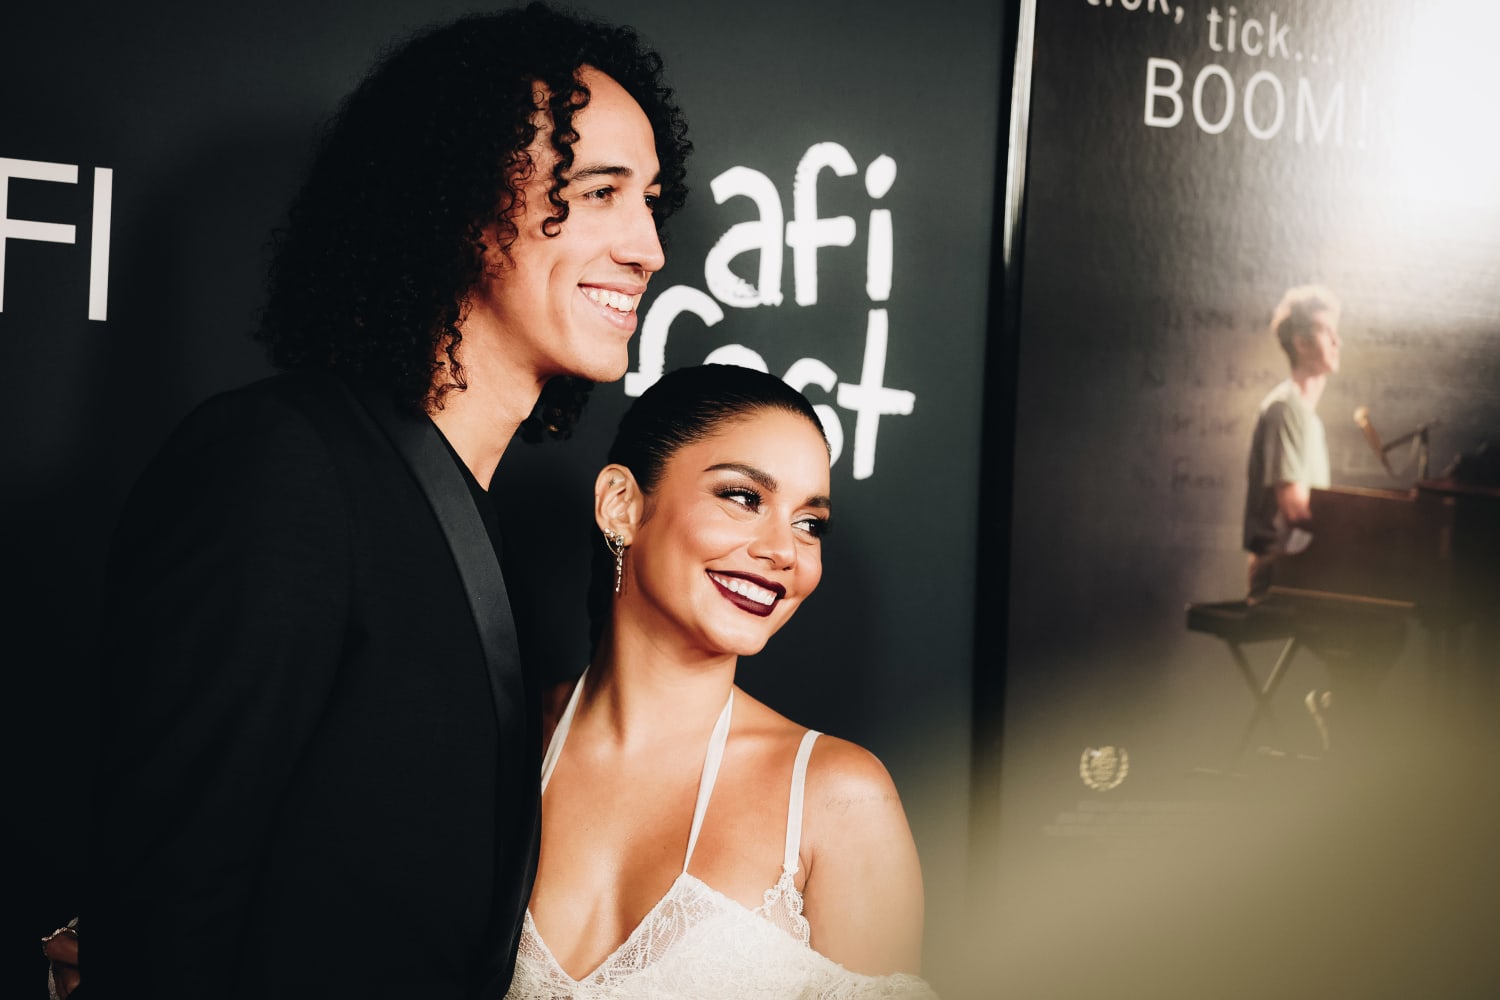 Vanessa Hudgens and baseball player Cole Tucker are engaged